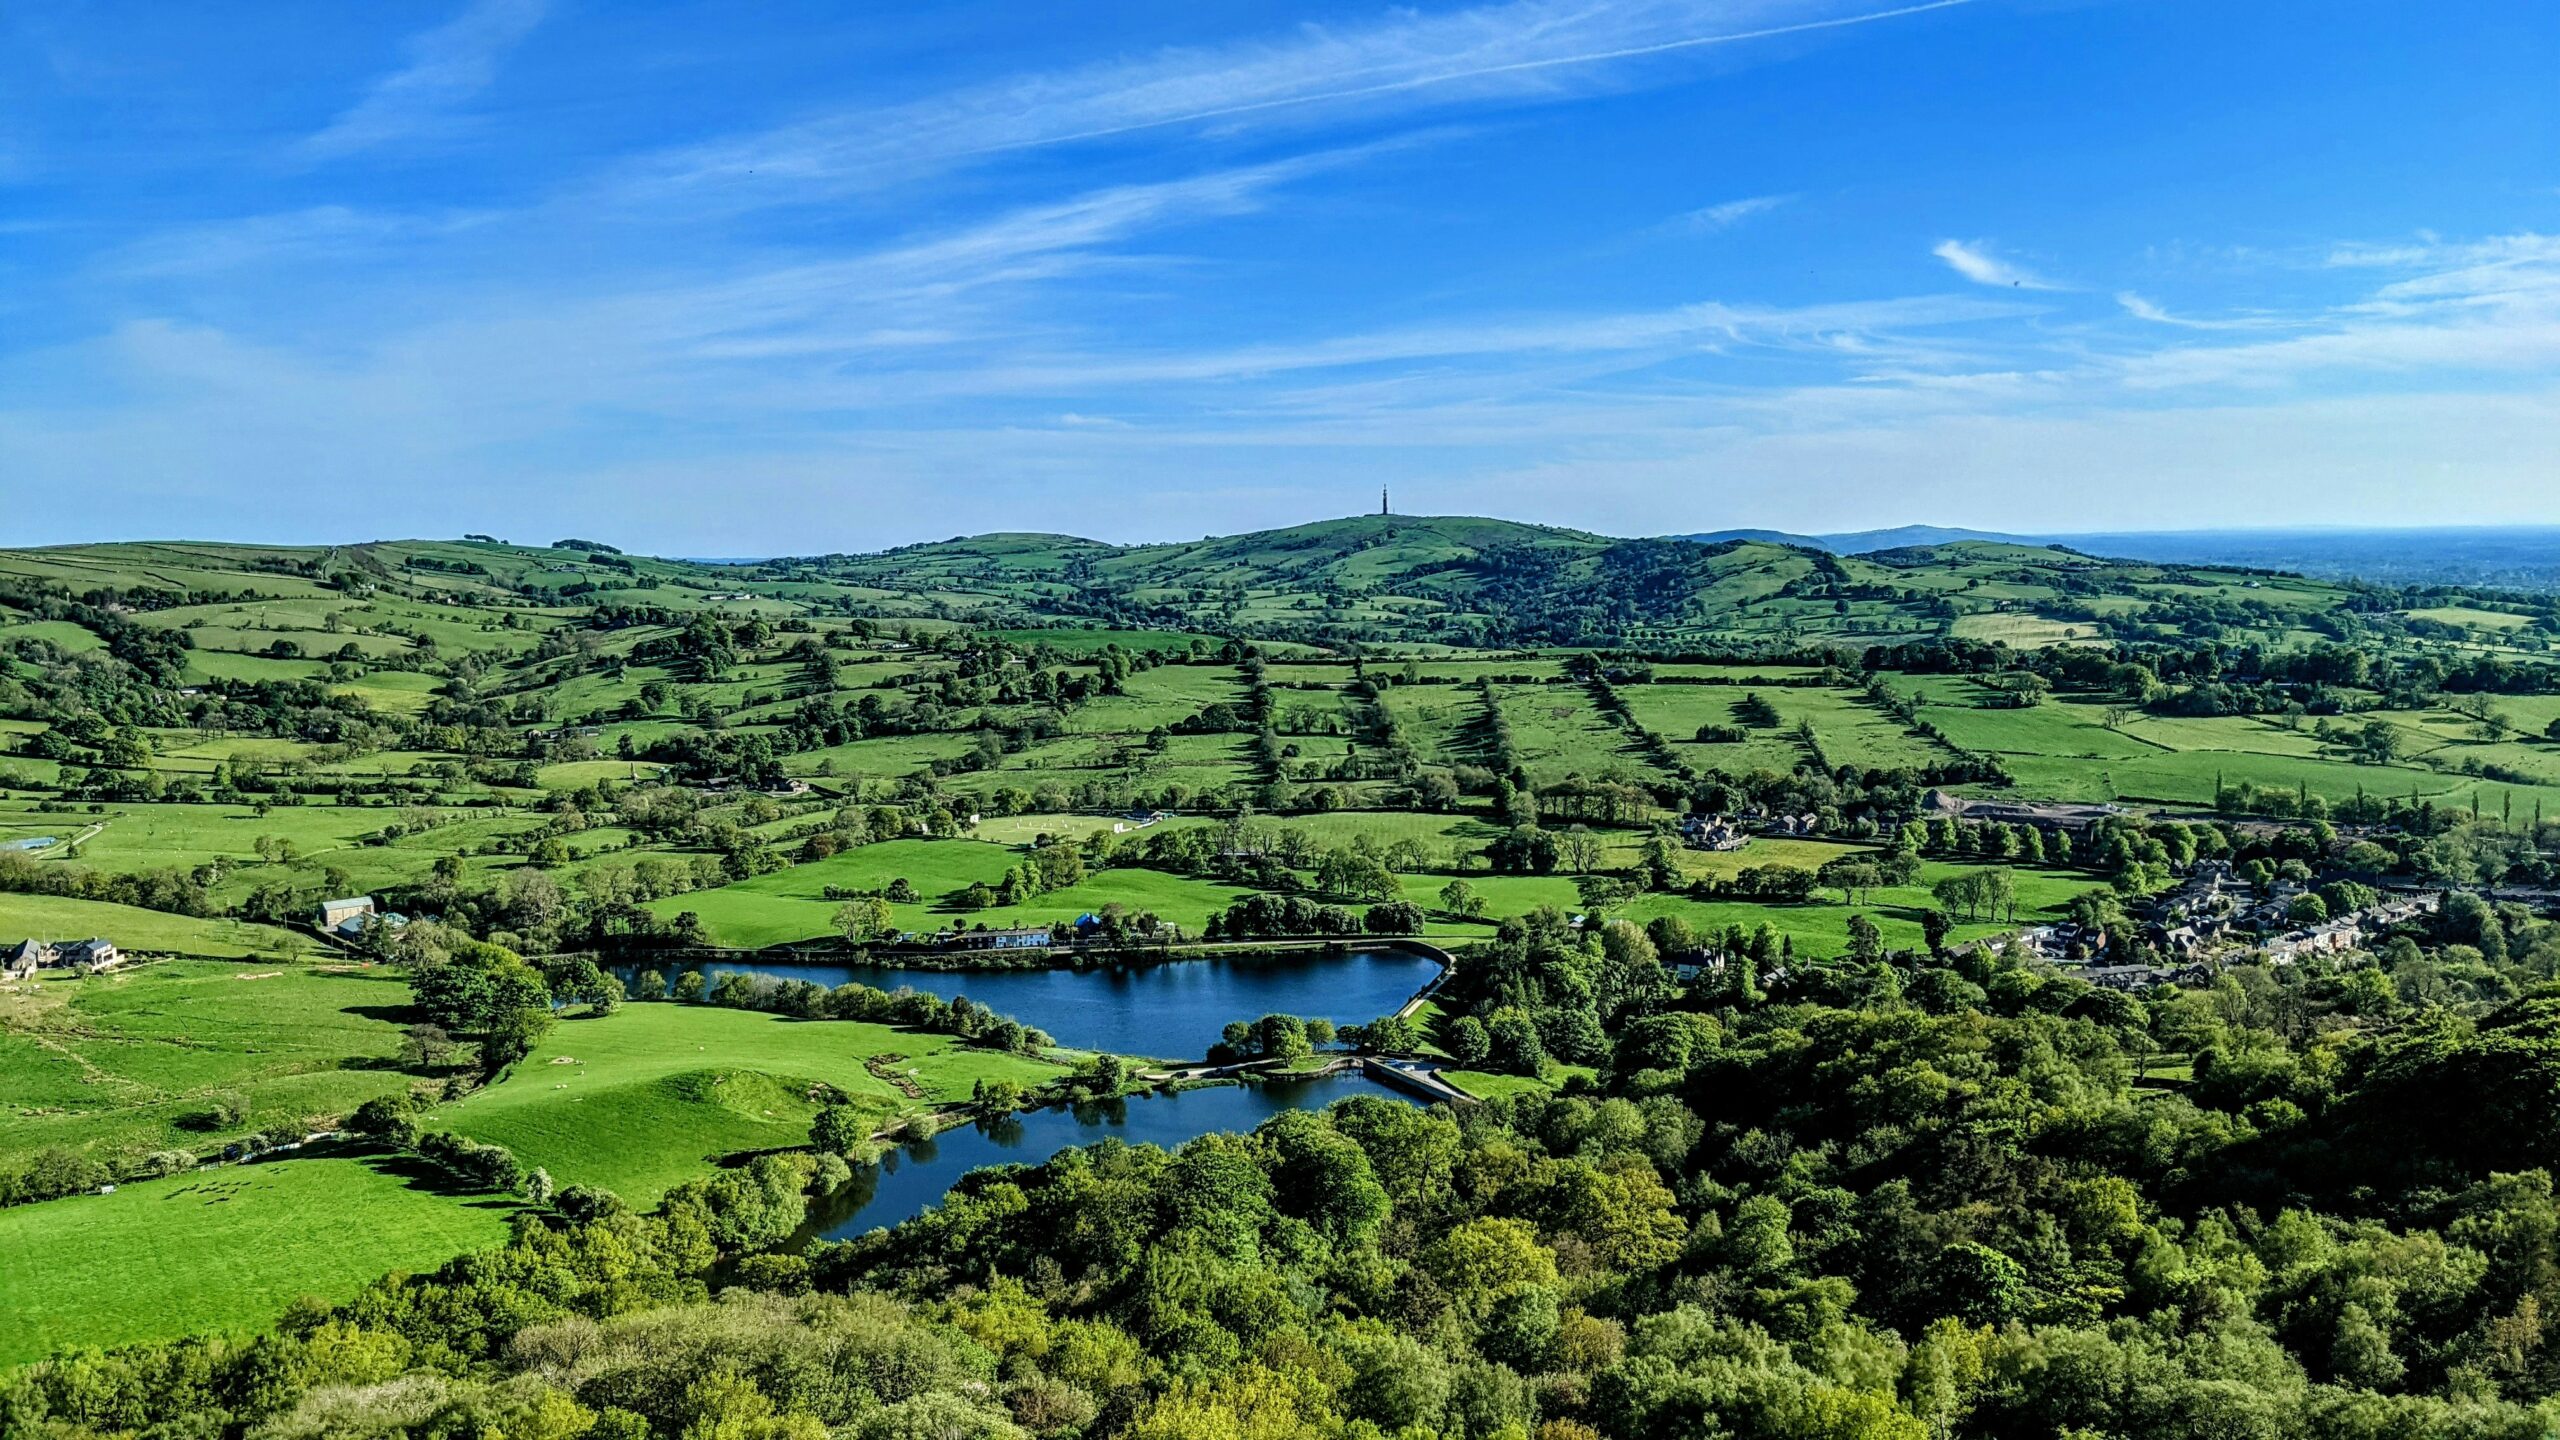 View of reservoirs and hills from Teggs Nose near Macclesfield on a summer's day